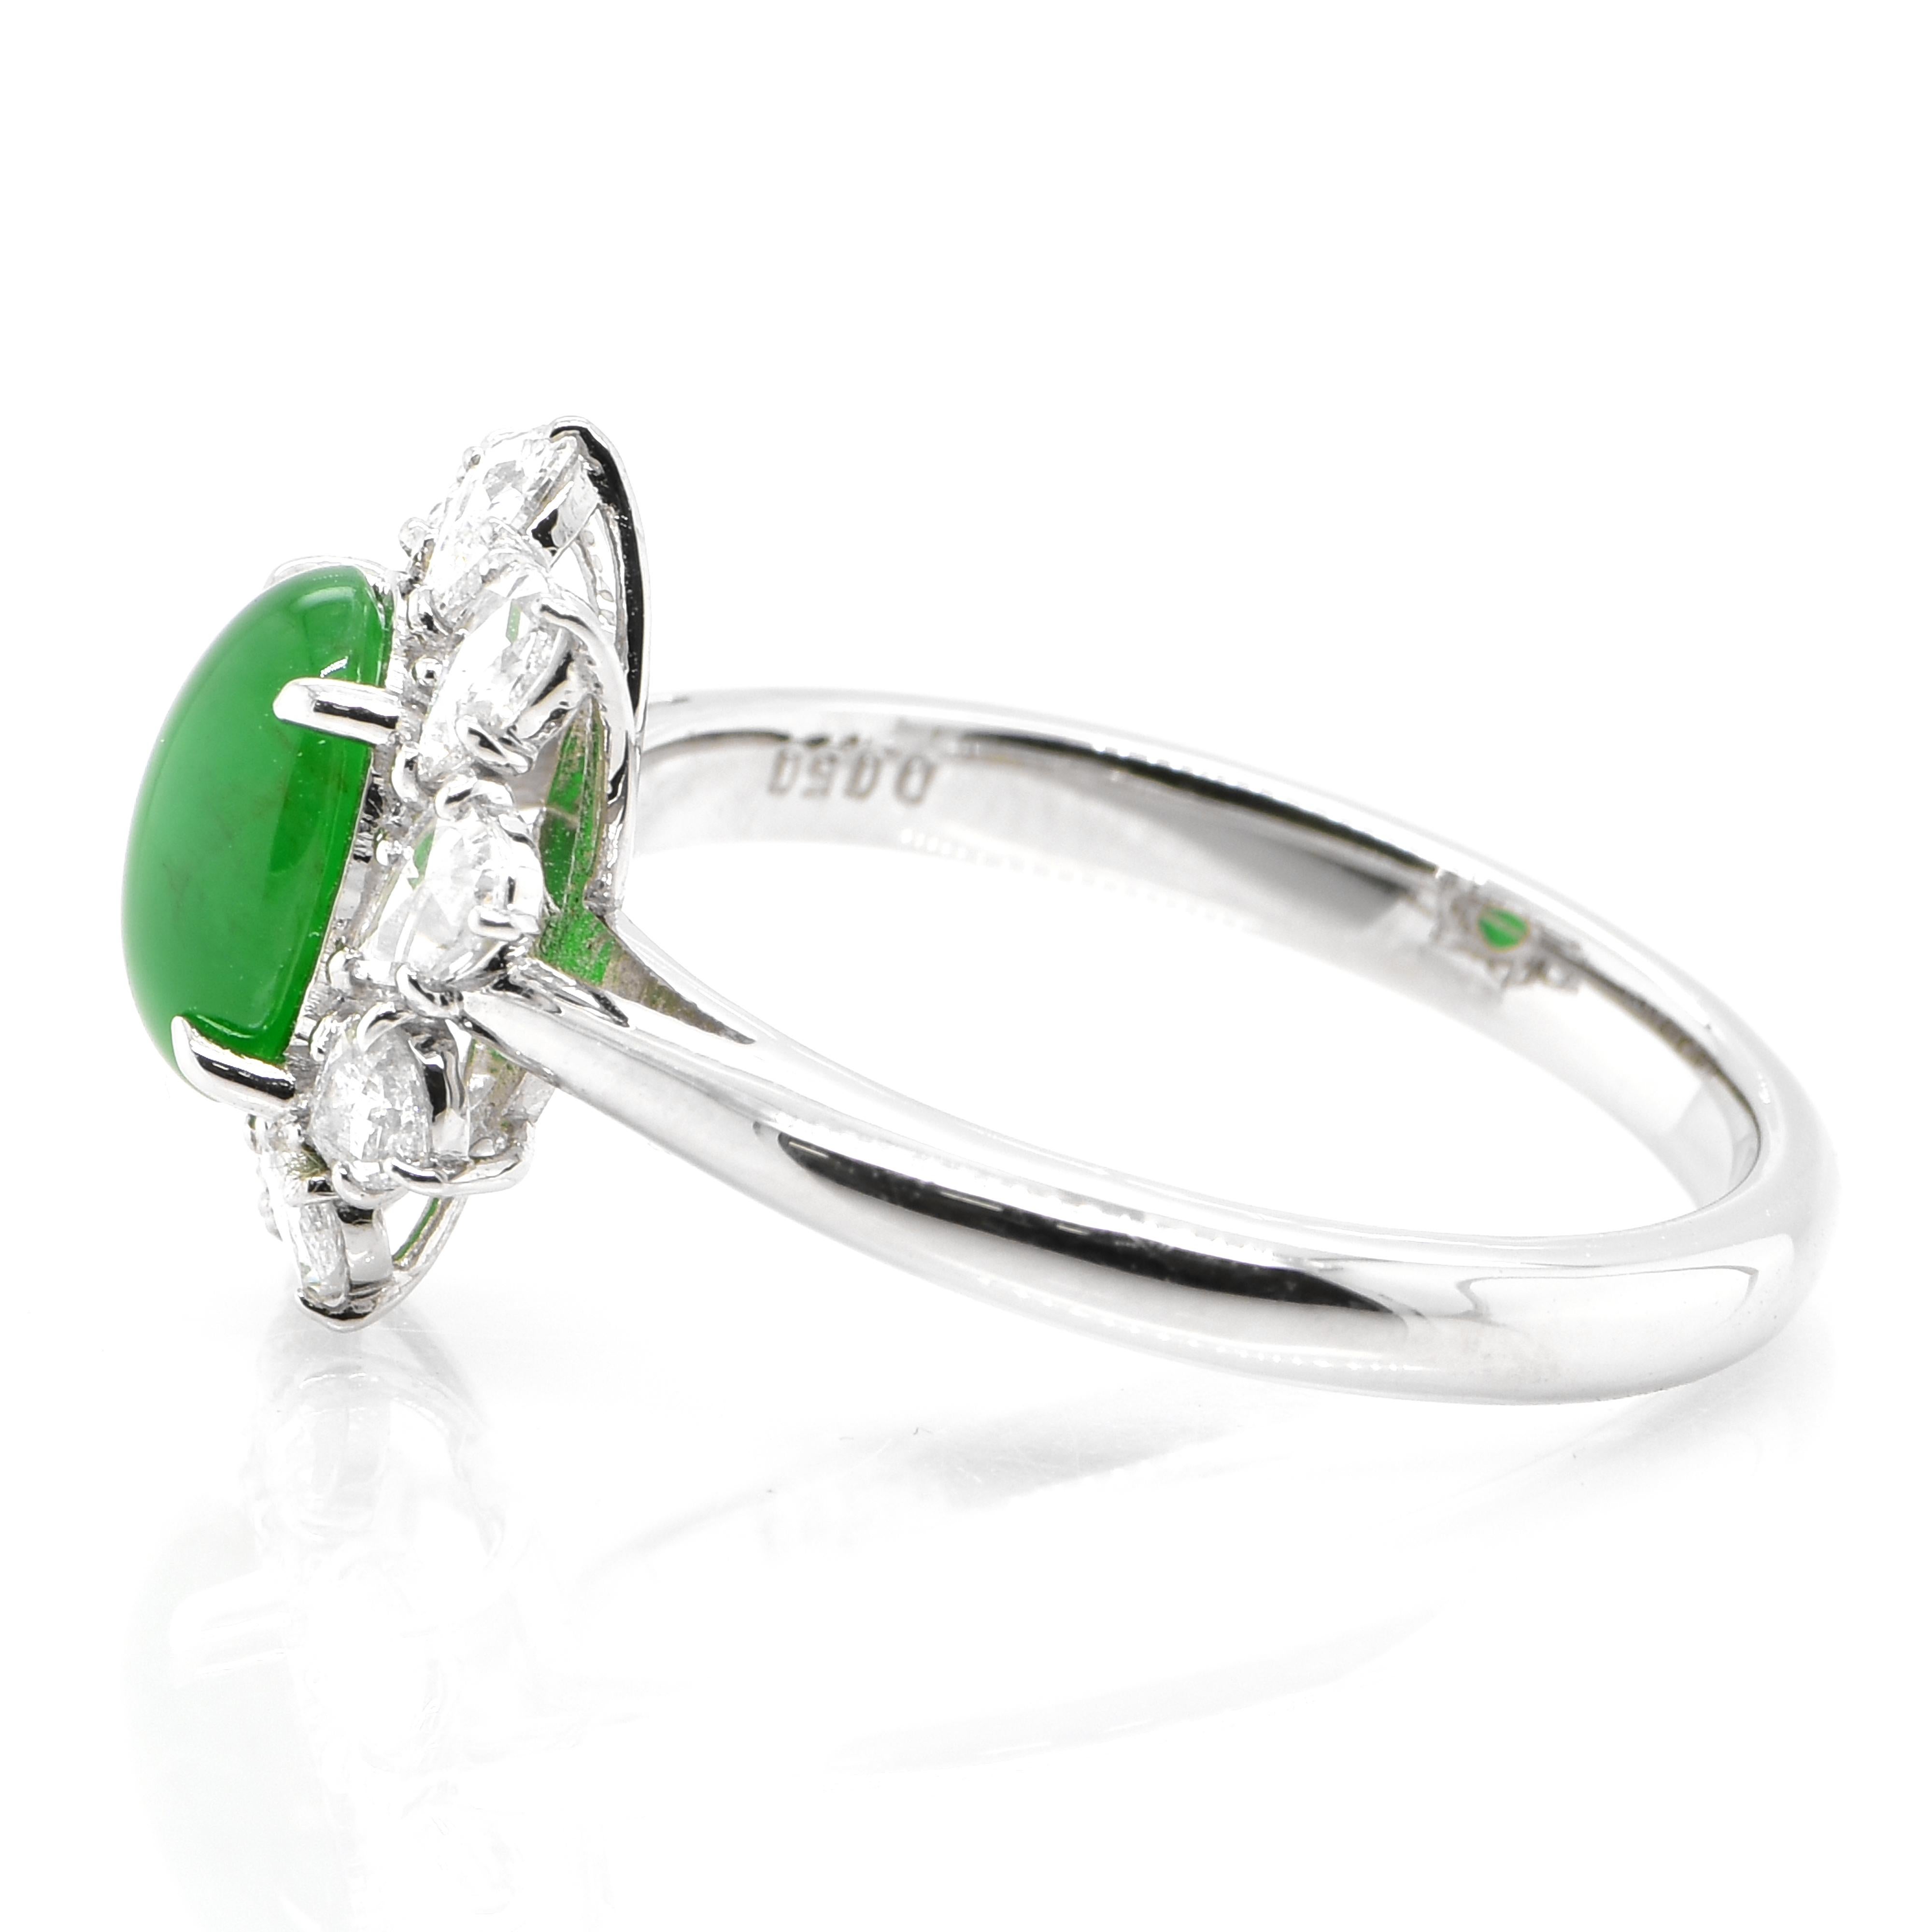 Cabochon 1.302 Carat Natural 'Type-A' Jadeite and Rose Cut Diamond Ring Set in Platinum For Sale